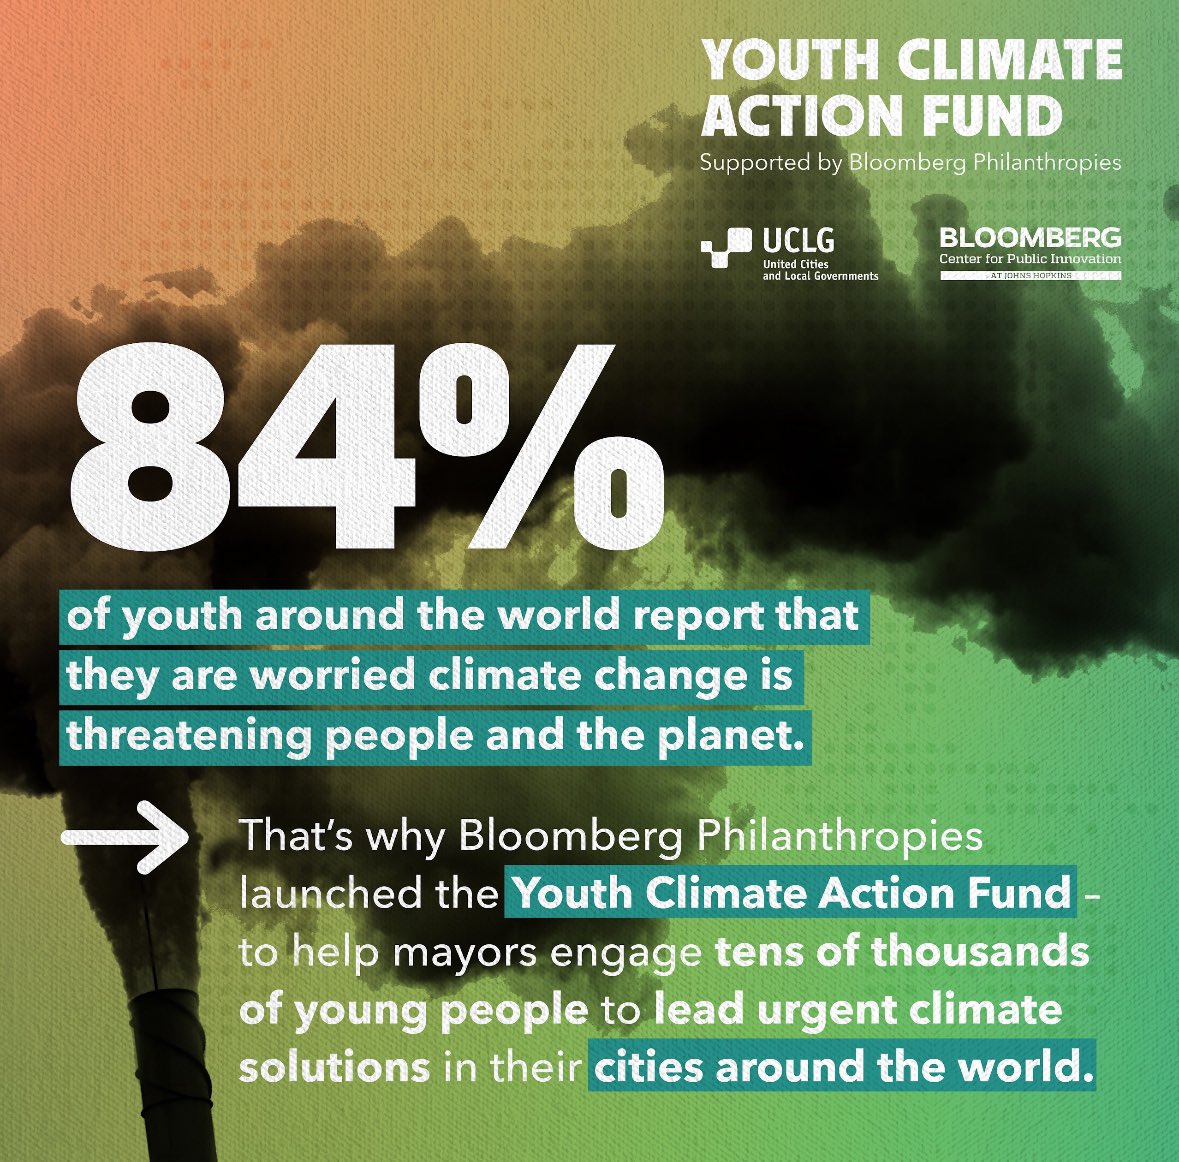 📣 I am thrilled to share that @cityofwestsac will join @BloombergDotOrg’s new Youth Climate Action Fund alongside mayors from 38 countries across six continents around the world. @uclg_org @publicinno